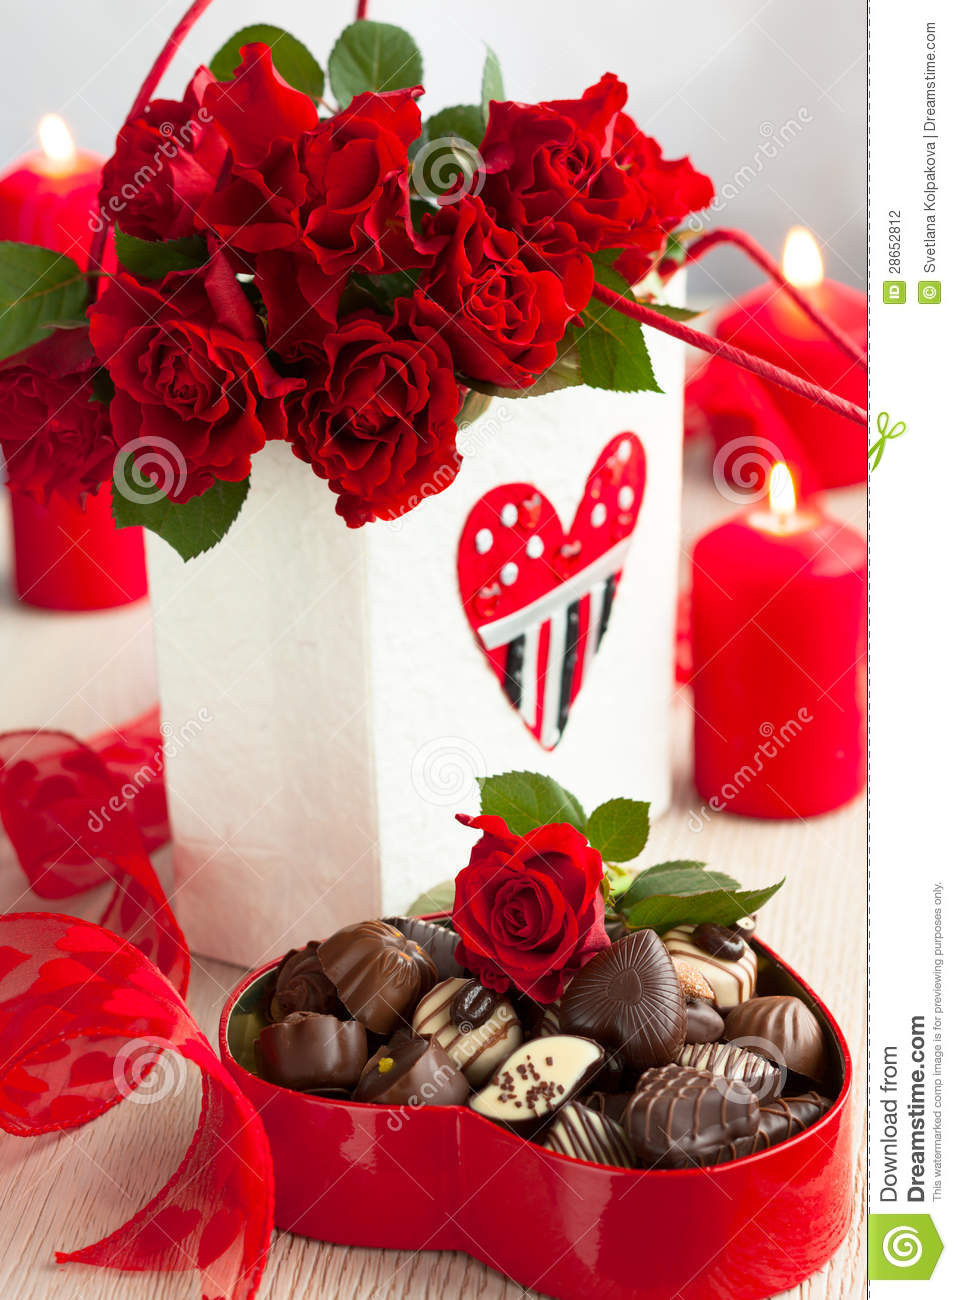 See'S Candy Valentines Day
 Roses And Chocolate Can s For Valentine s Day Stock